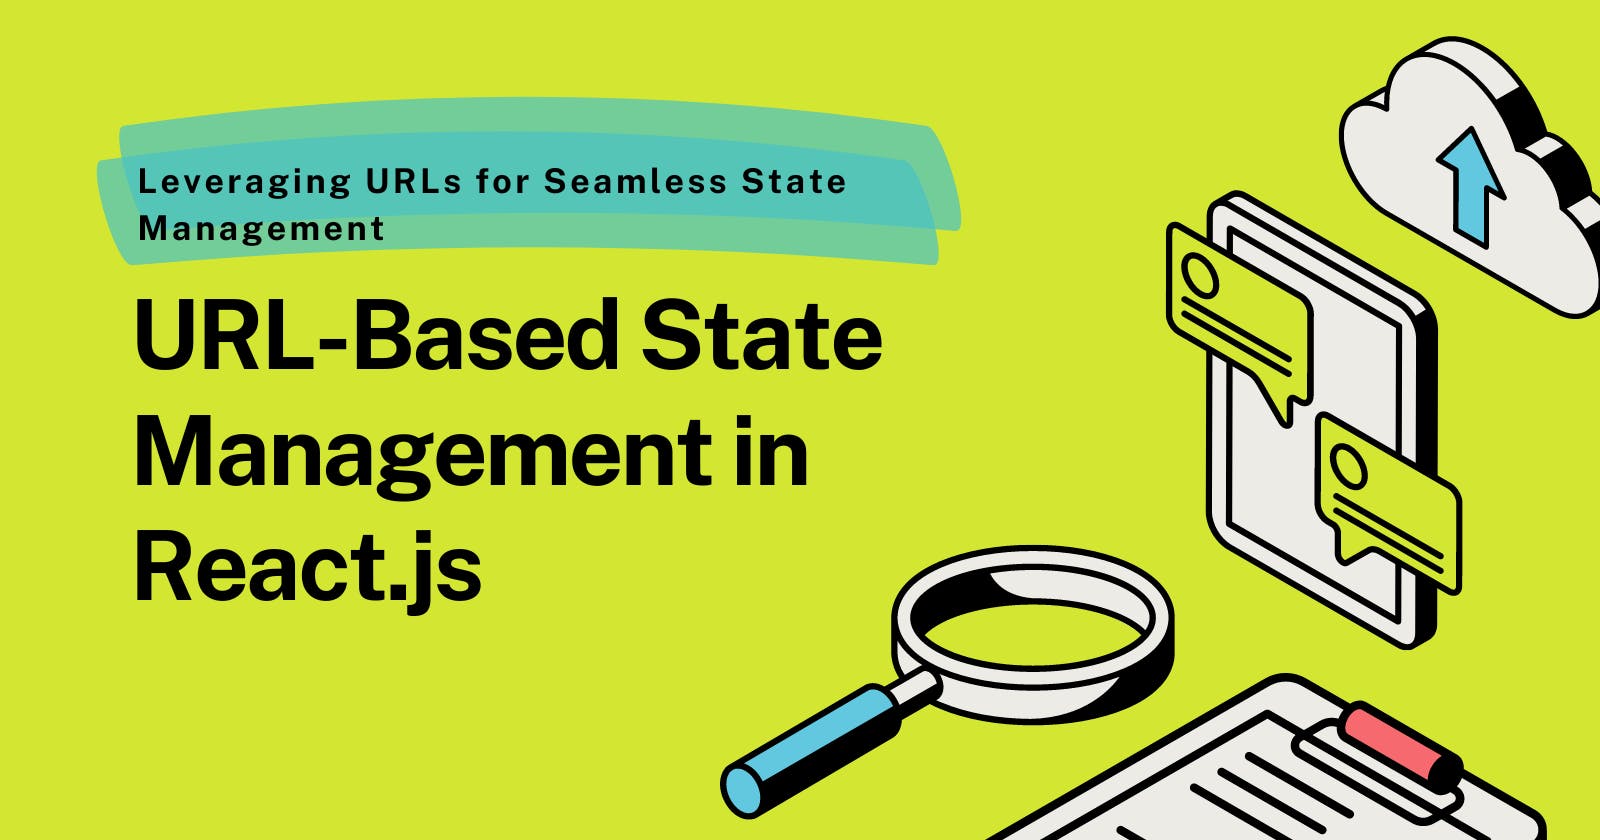 URL-Based State Management in React.js